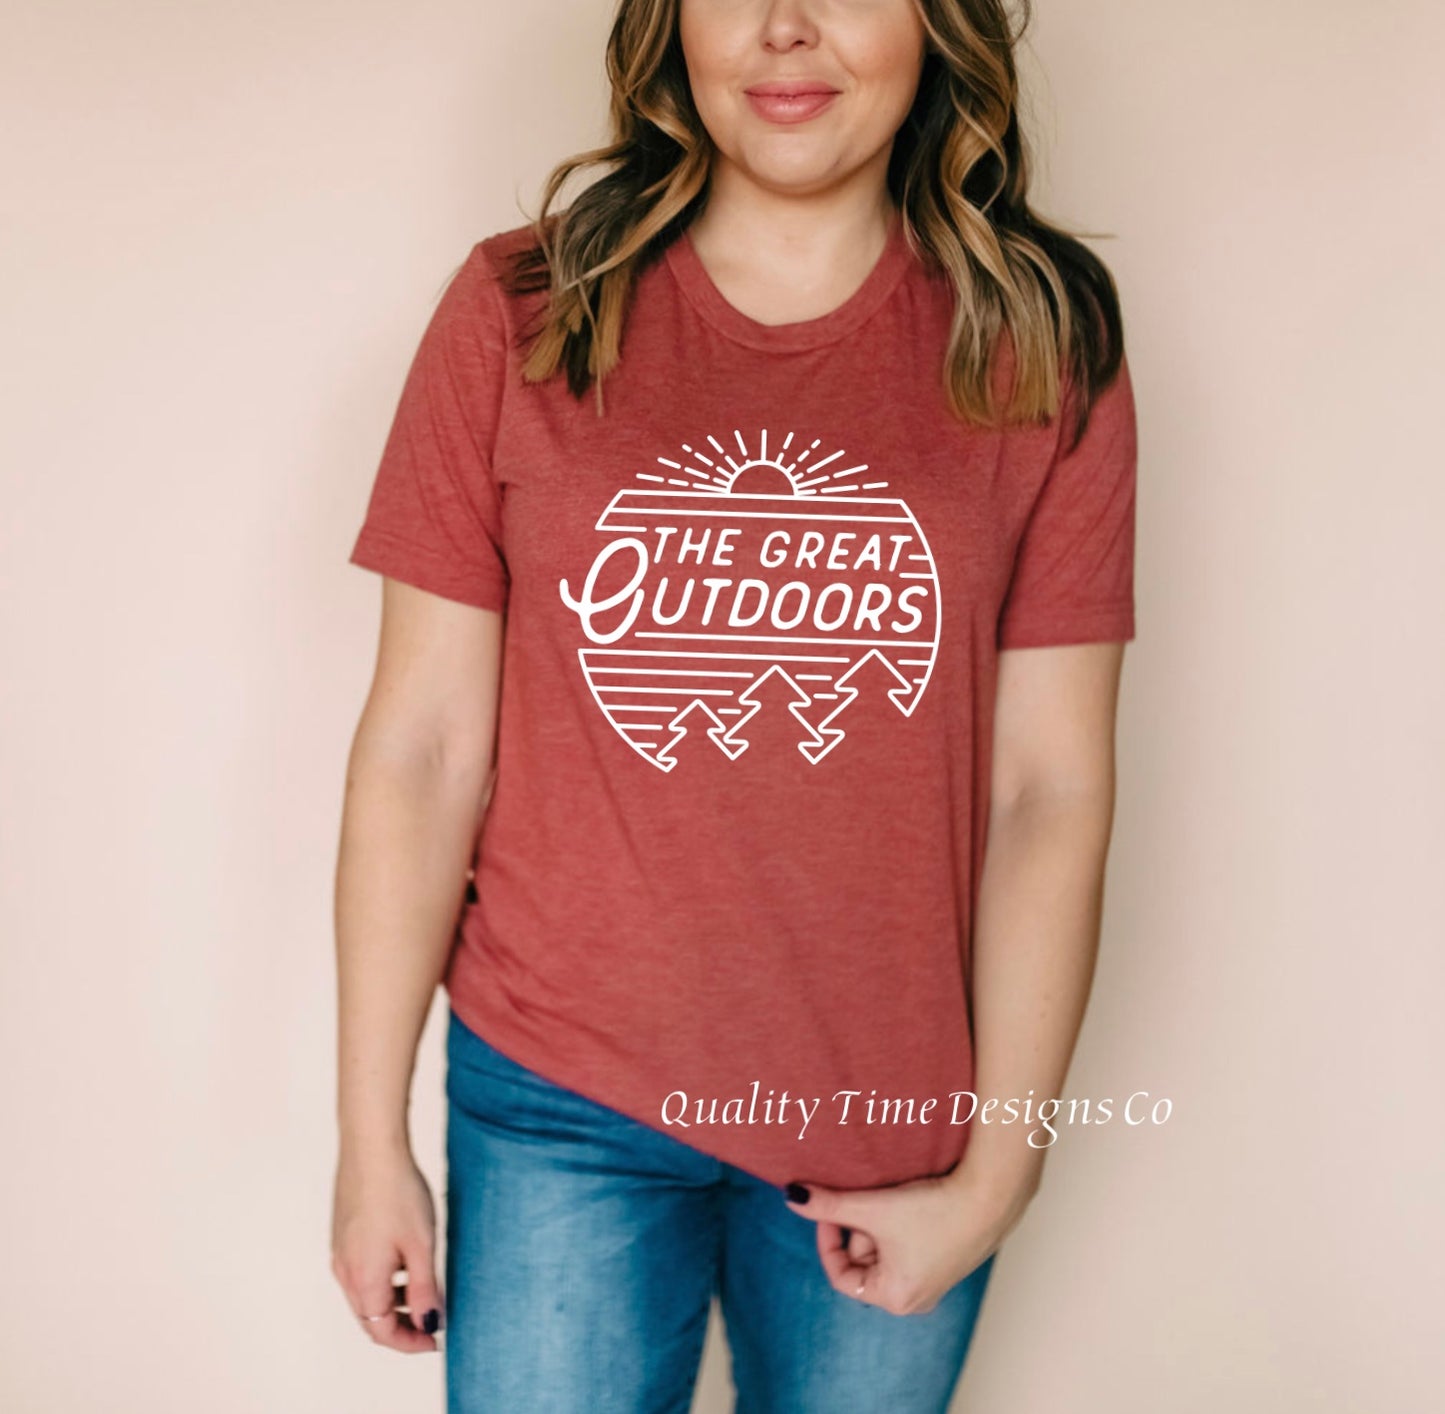 The great outdoors t-shirt 